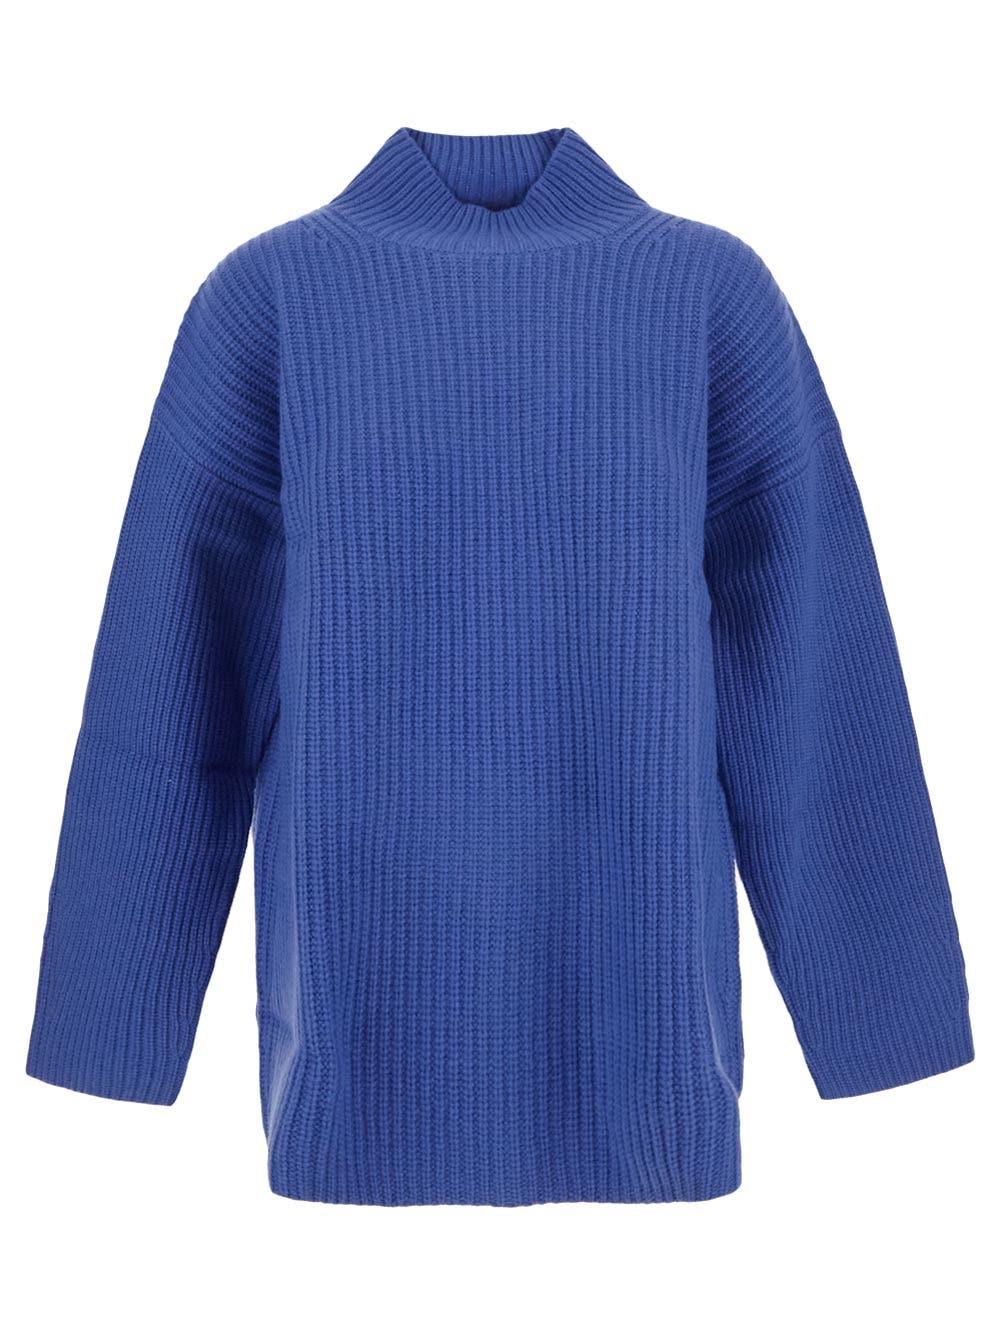 See by Chloé Knitted Night Cobalt Pullover